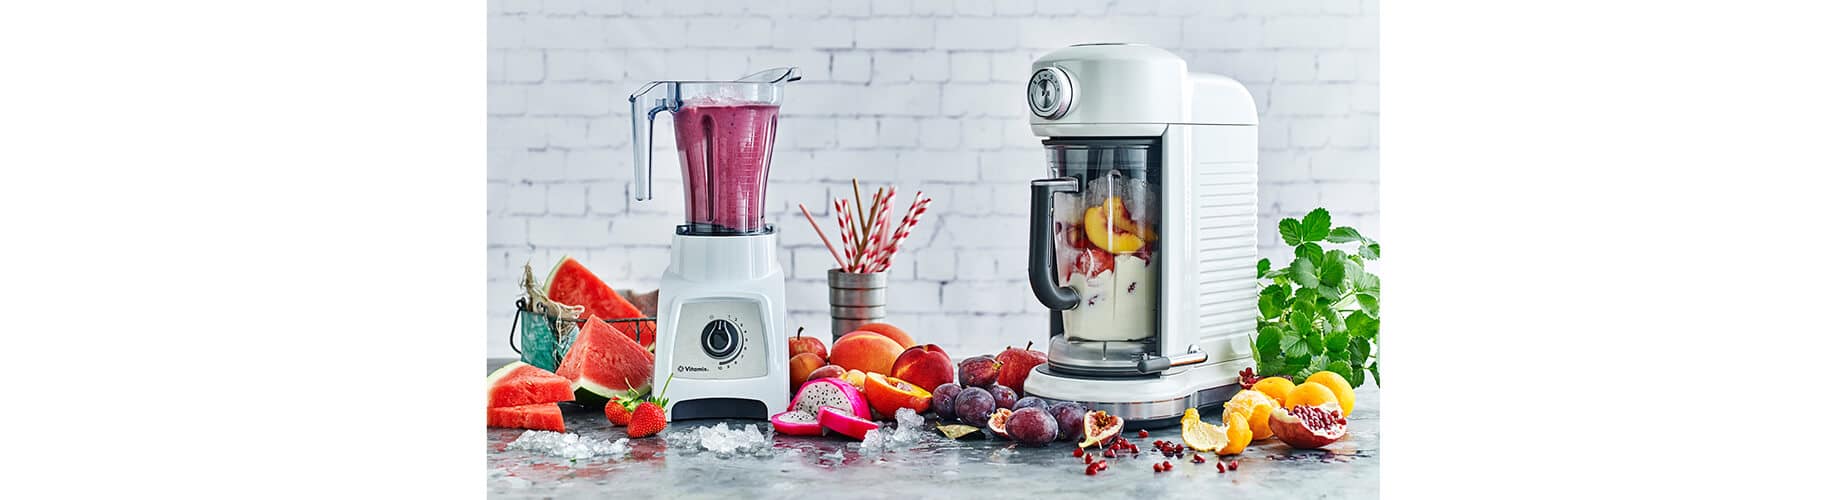 a blender and a food processor on a table full of different fruits